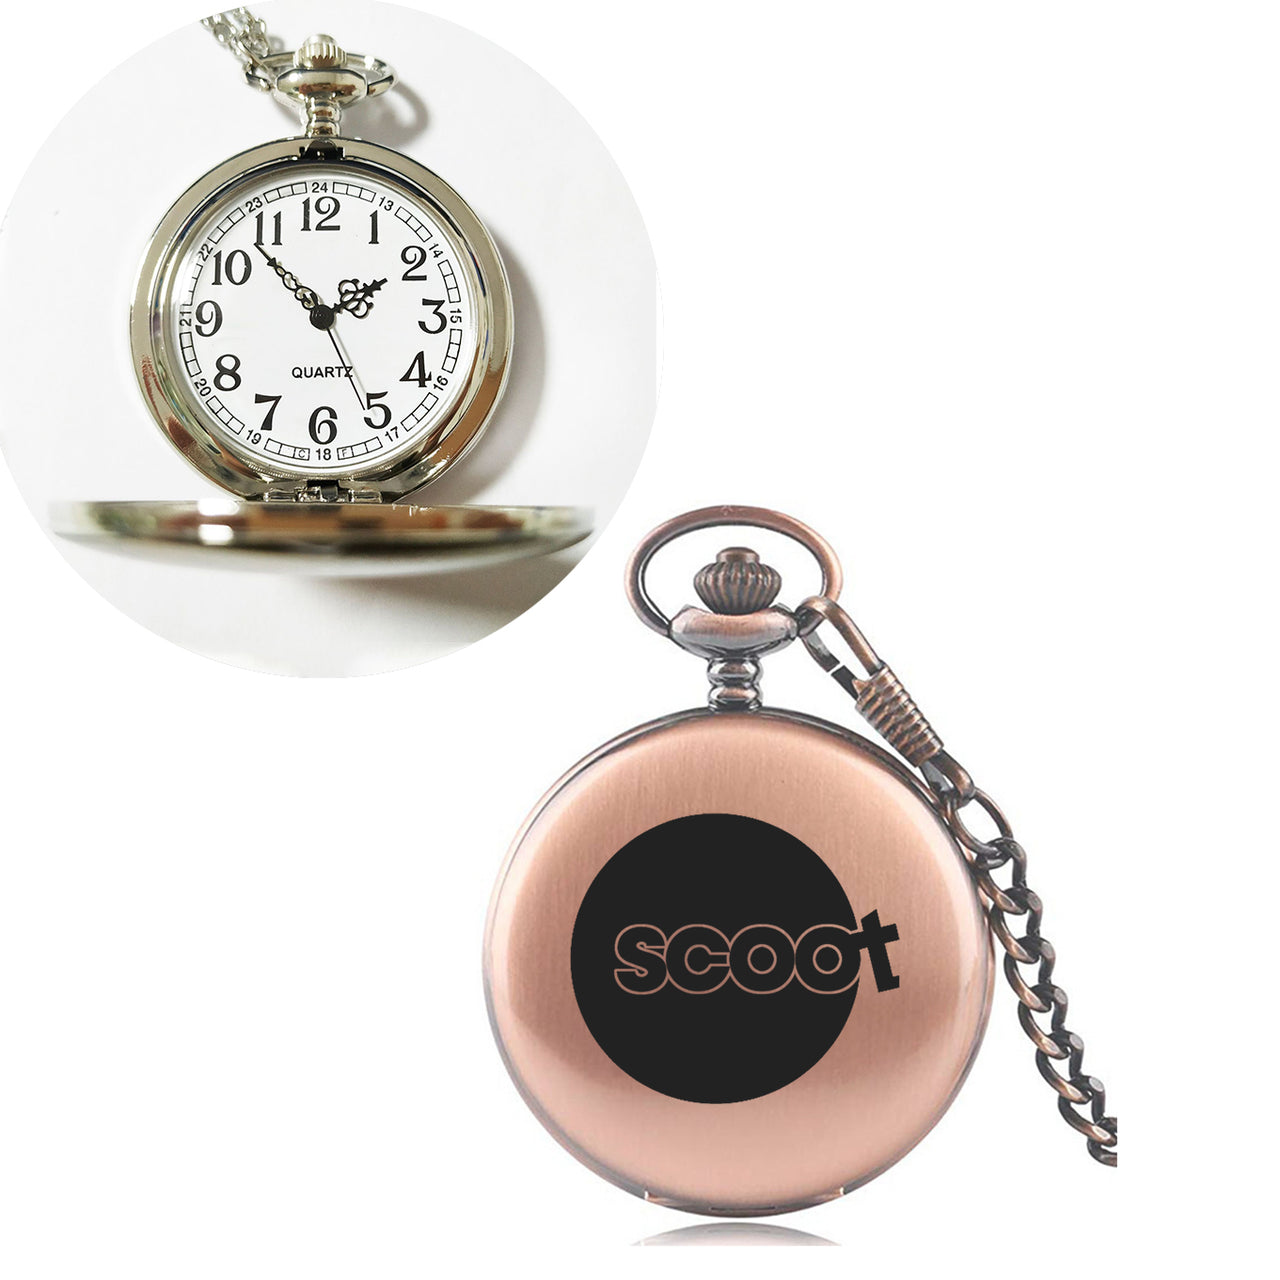 Scoot Airlines Designed Pocket Watches